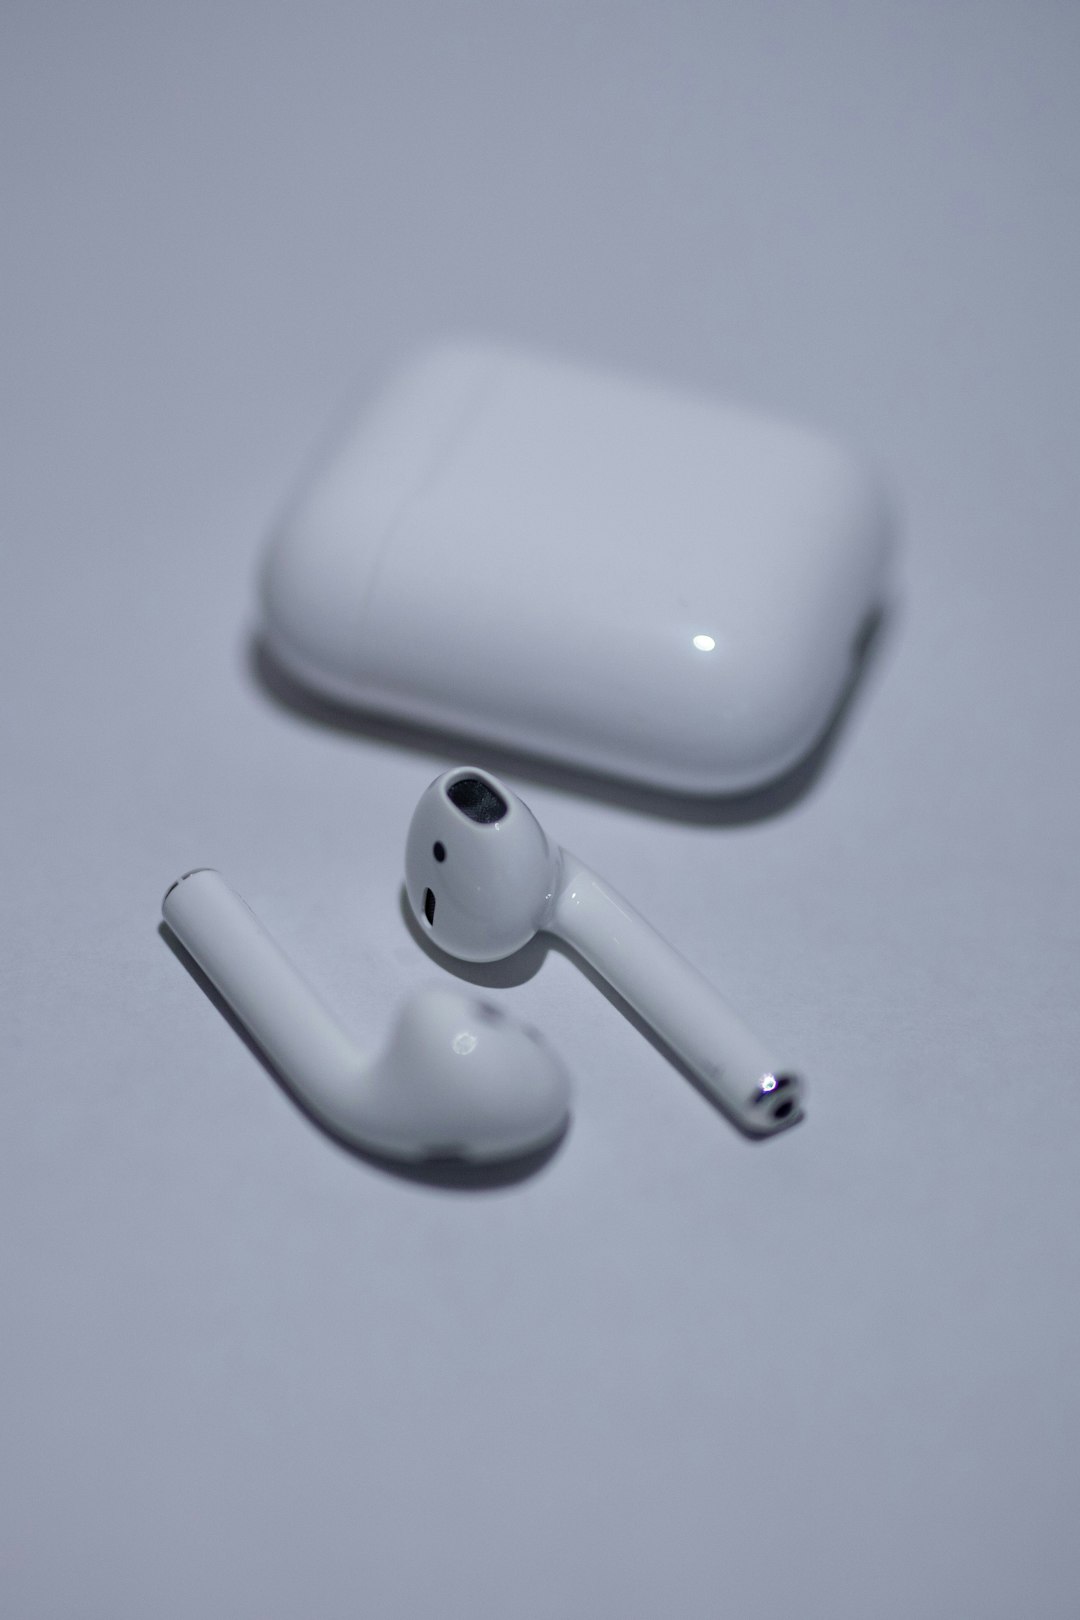 white apple airpods on white surface